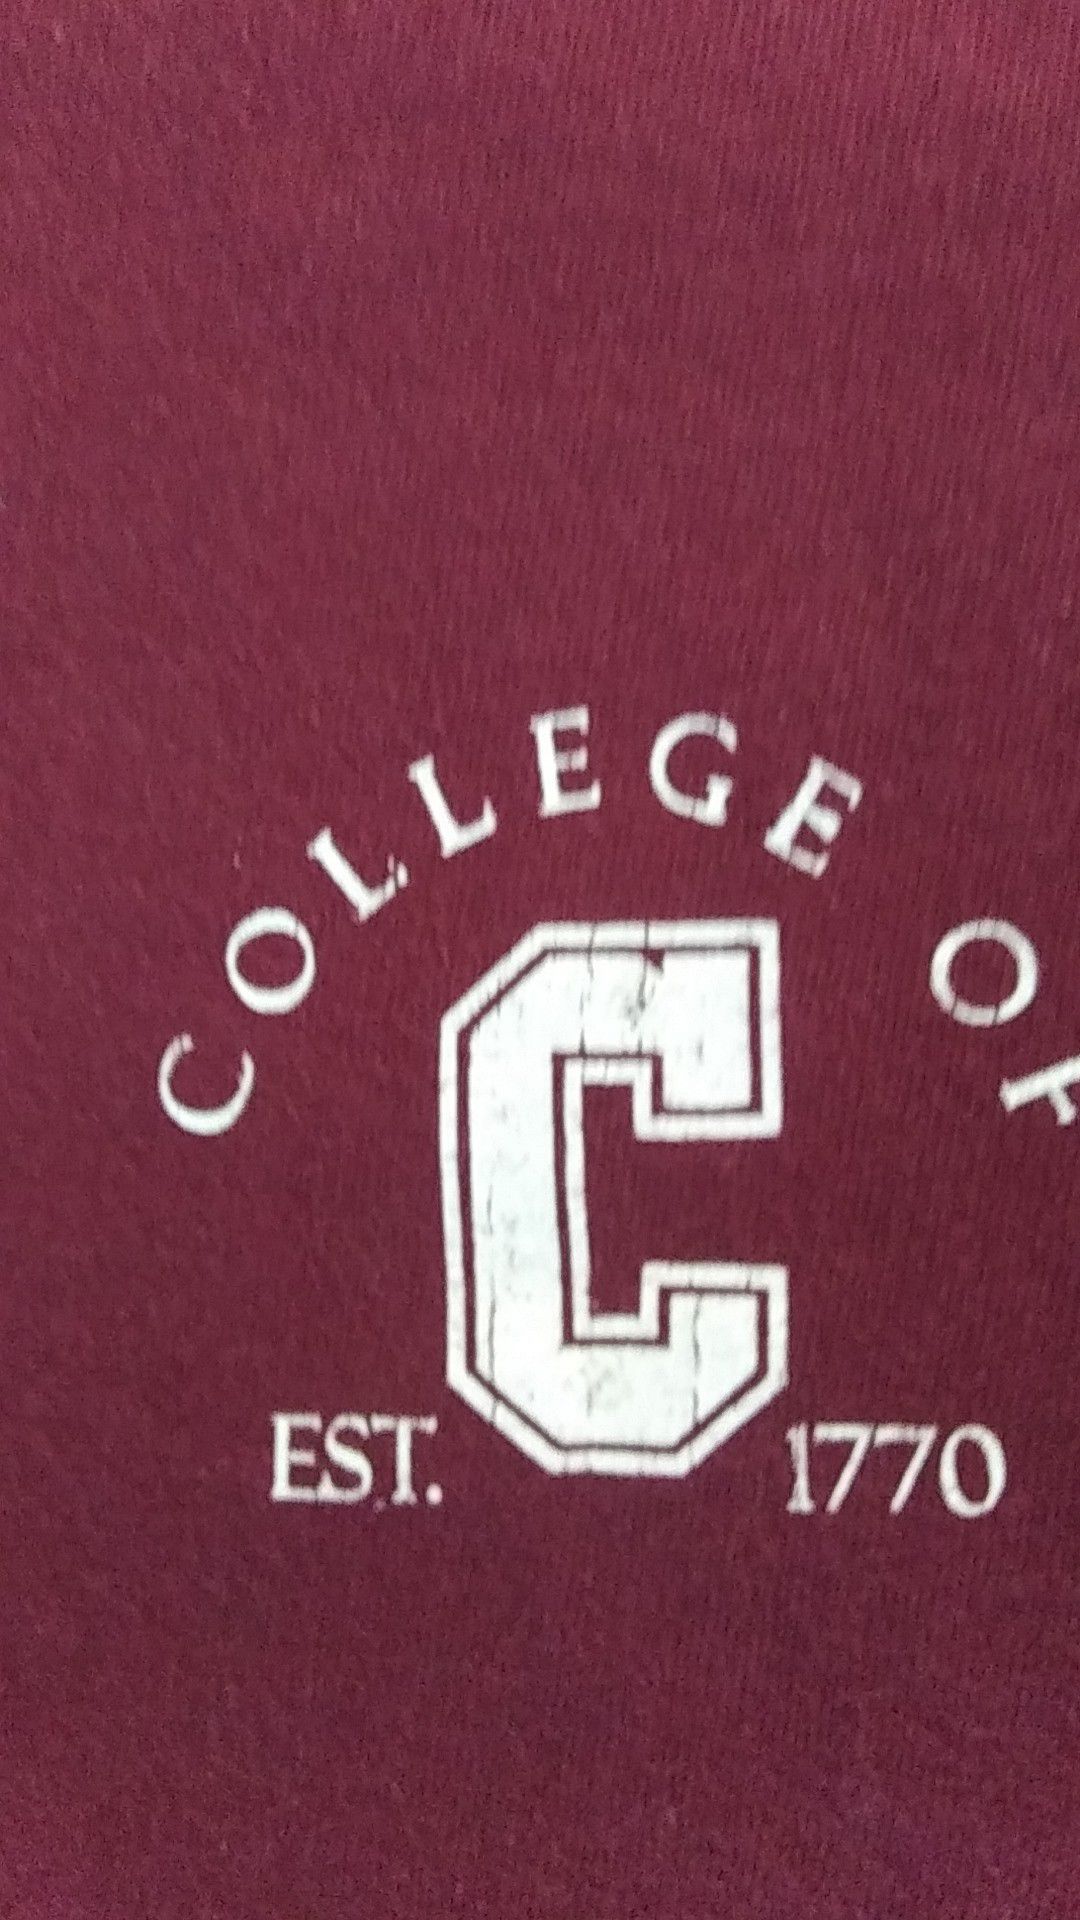 ADULT T-SHIRT COLLEGE OF CHARLESTON for Sale in Simpsonville, SC - OfferUp